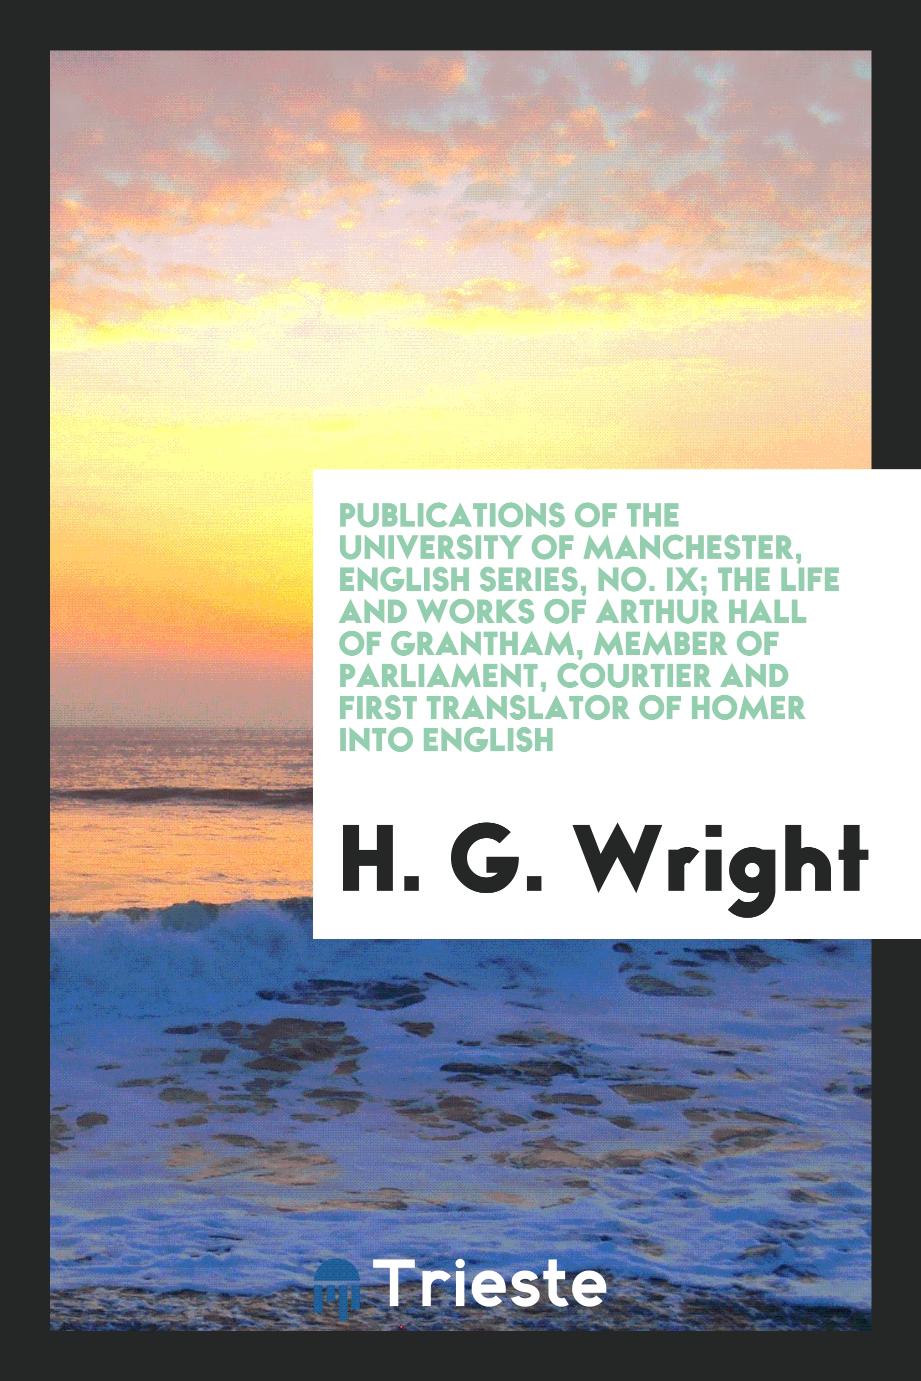 Publications of the University of Manchester, English series, No. IX; The life and works of Arthur Hall of Grantham, member of Parliament, courtier and first translator of Homer into English